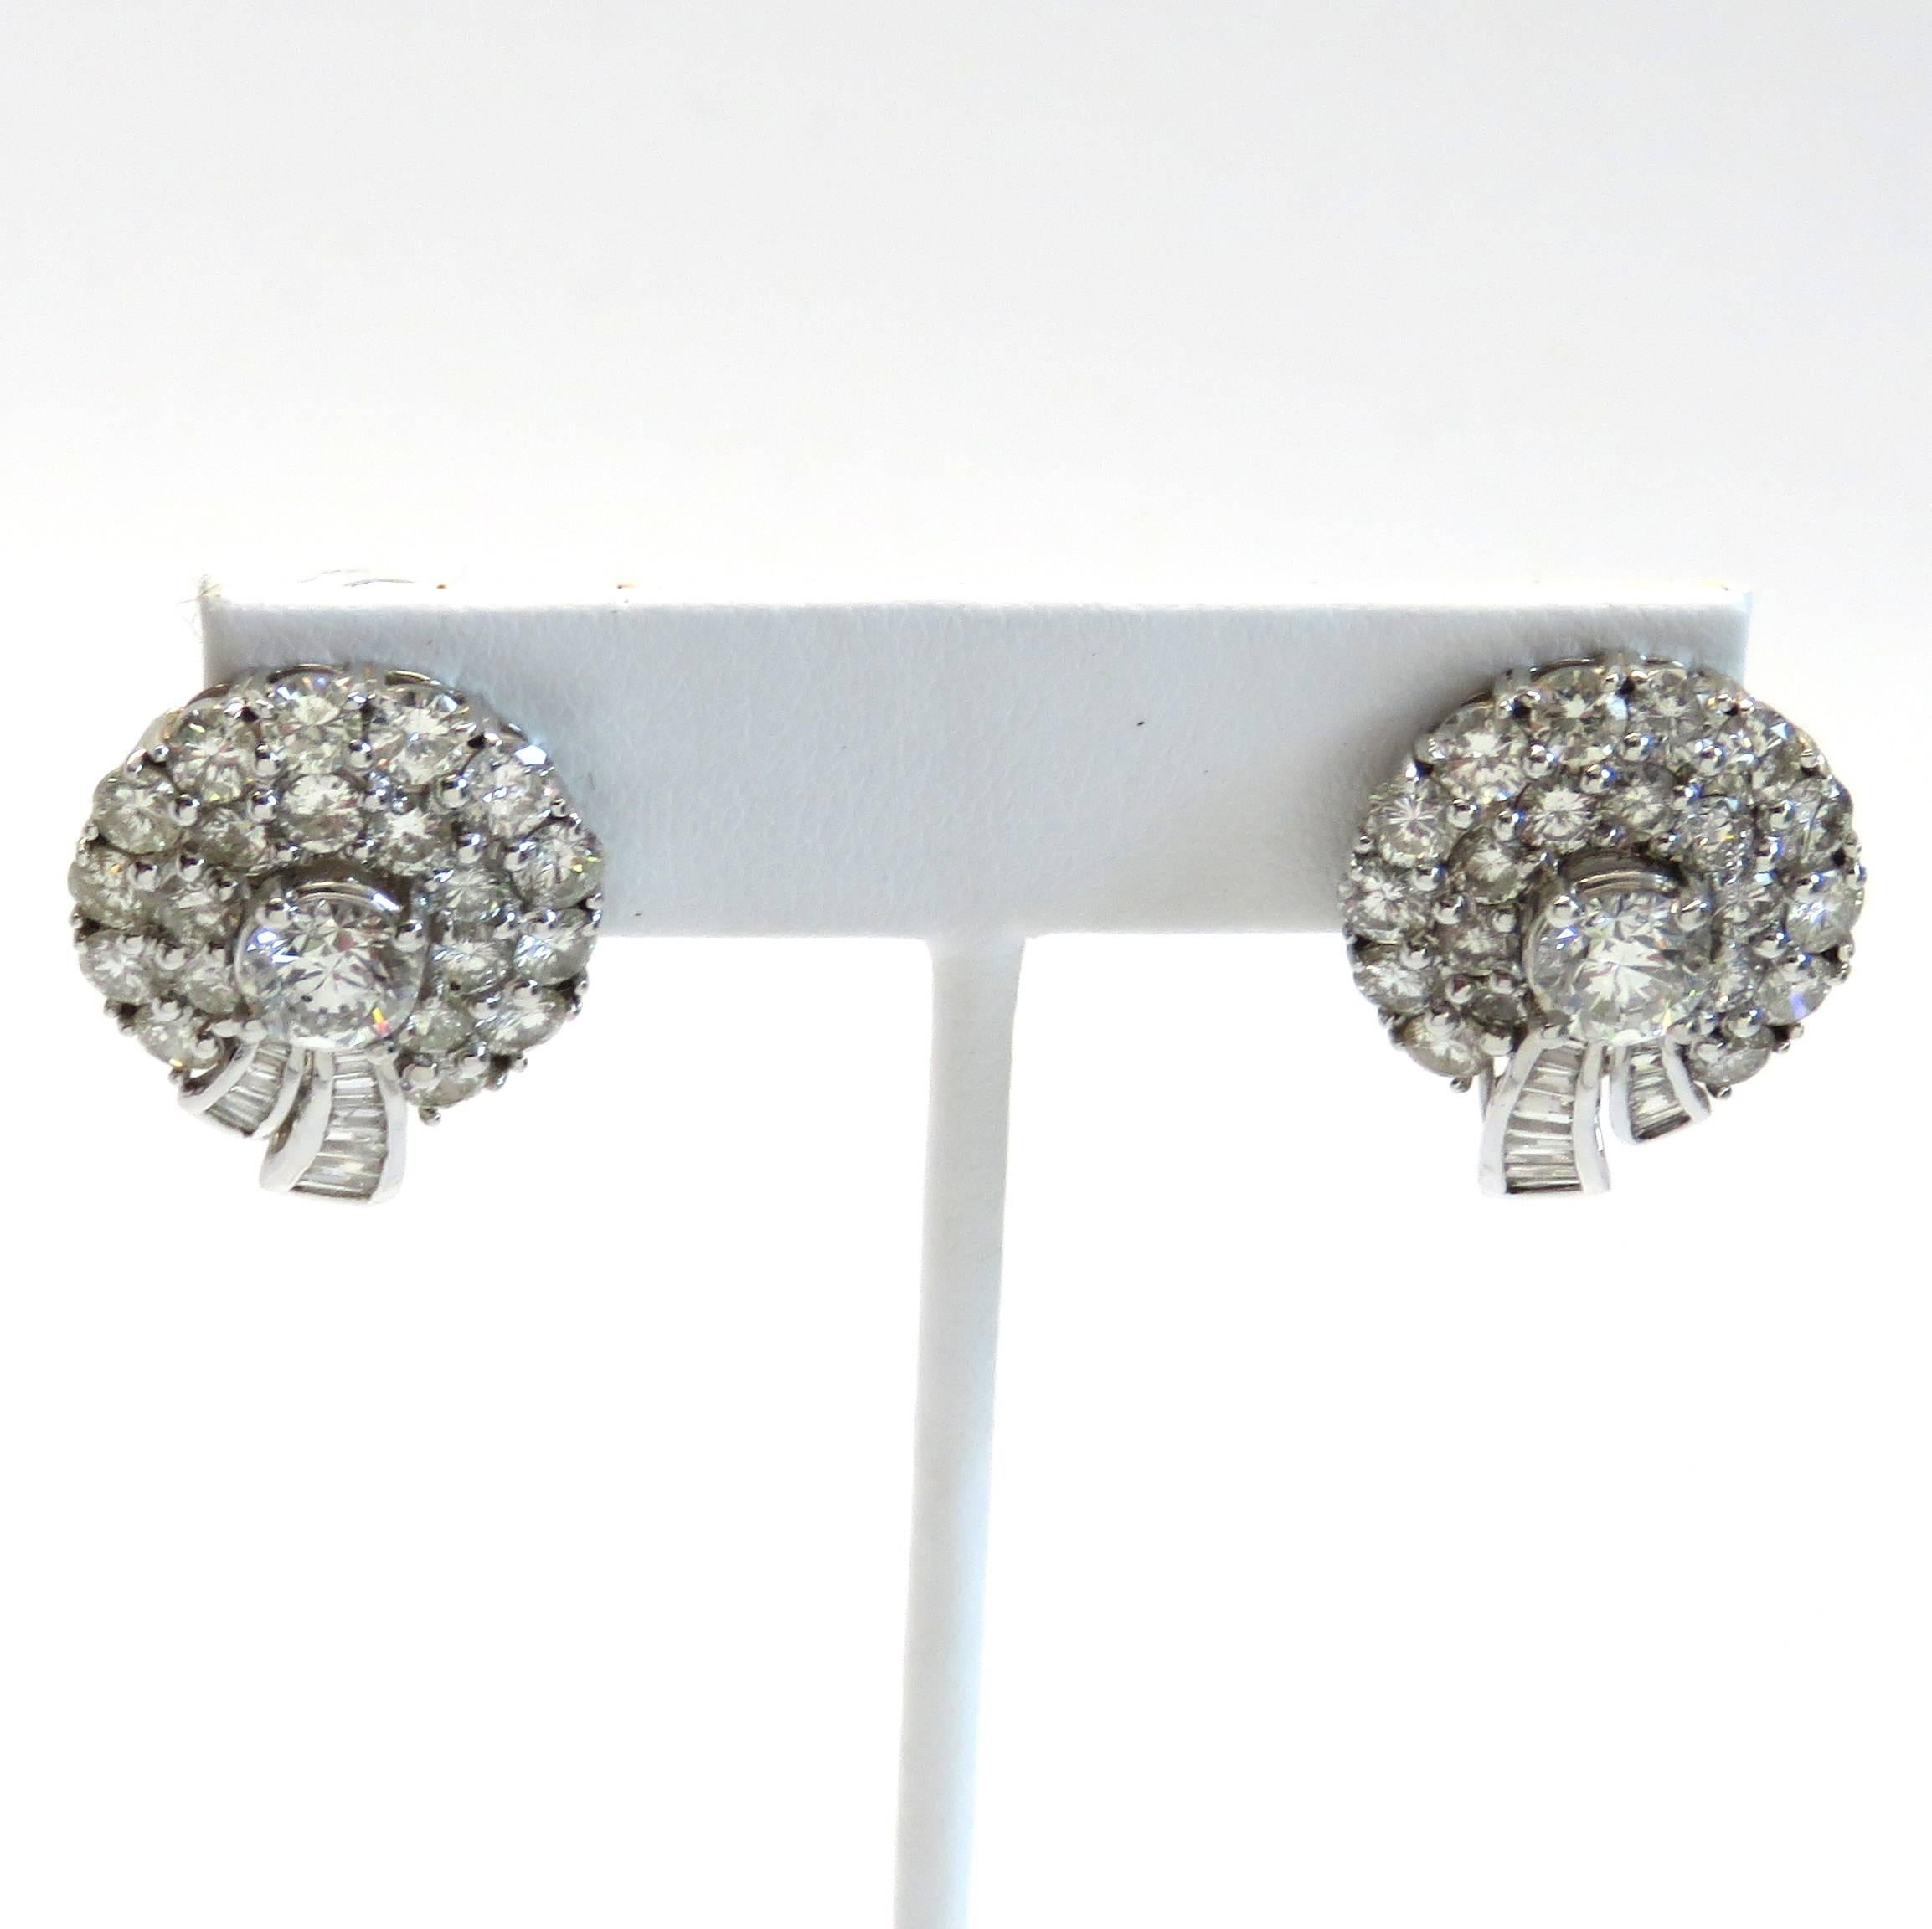 A pair of 18k white gold earrings set with approximately 5.50 carats of H/VS-SI1 diamonds.  The earrings measure 22mm x 18mm and weigh 10.5 grams. 